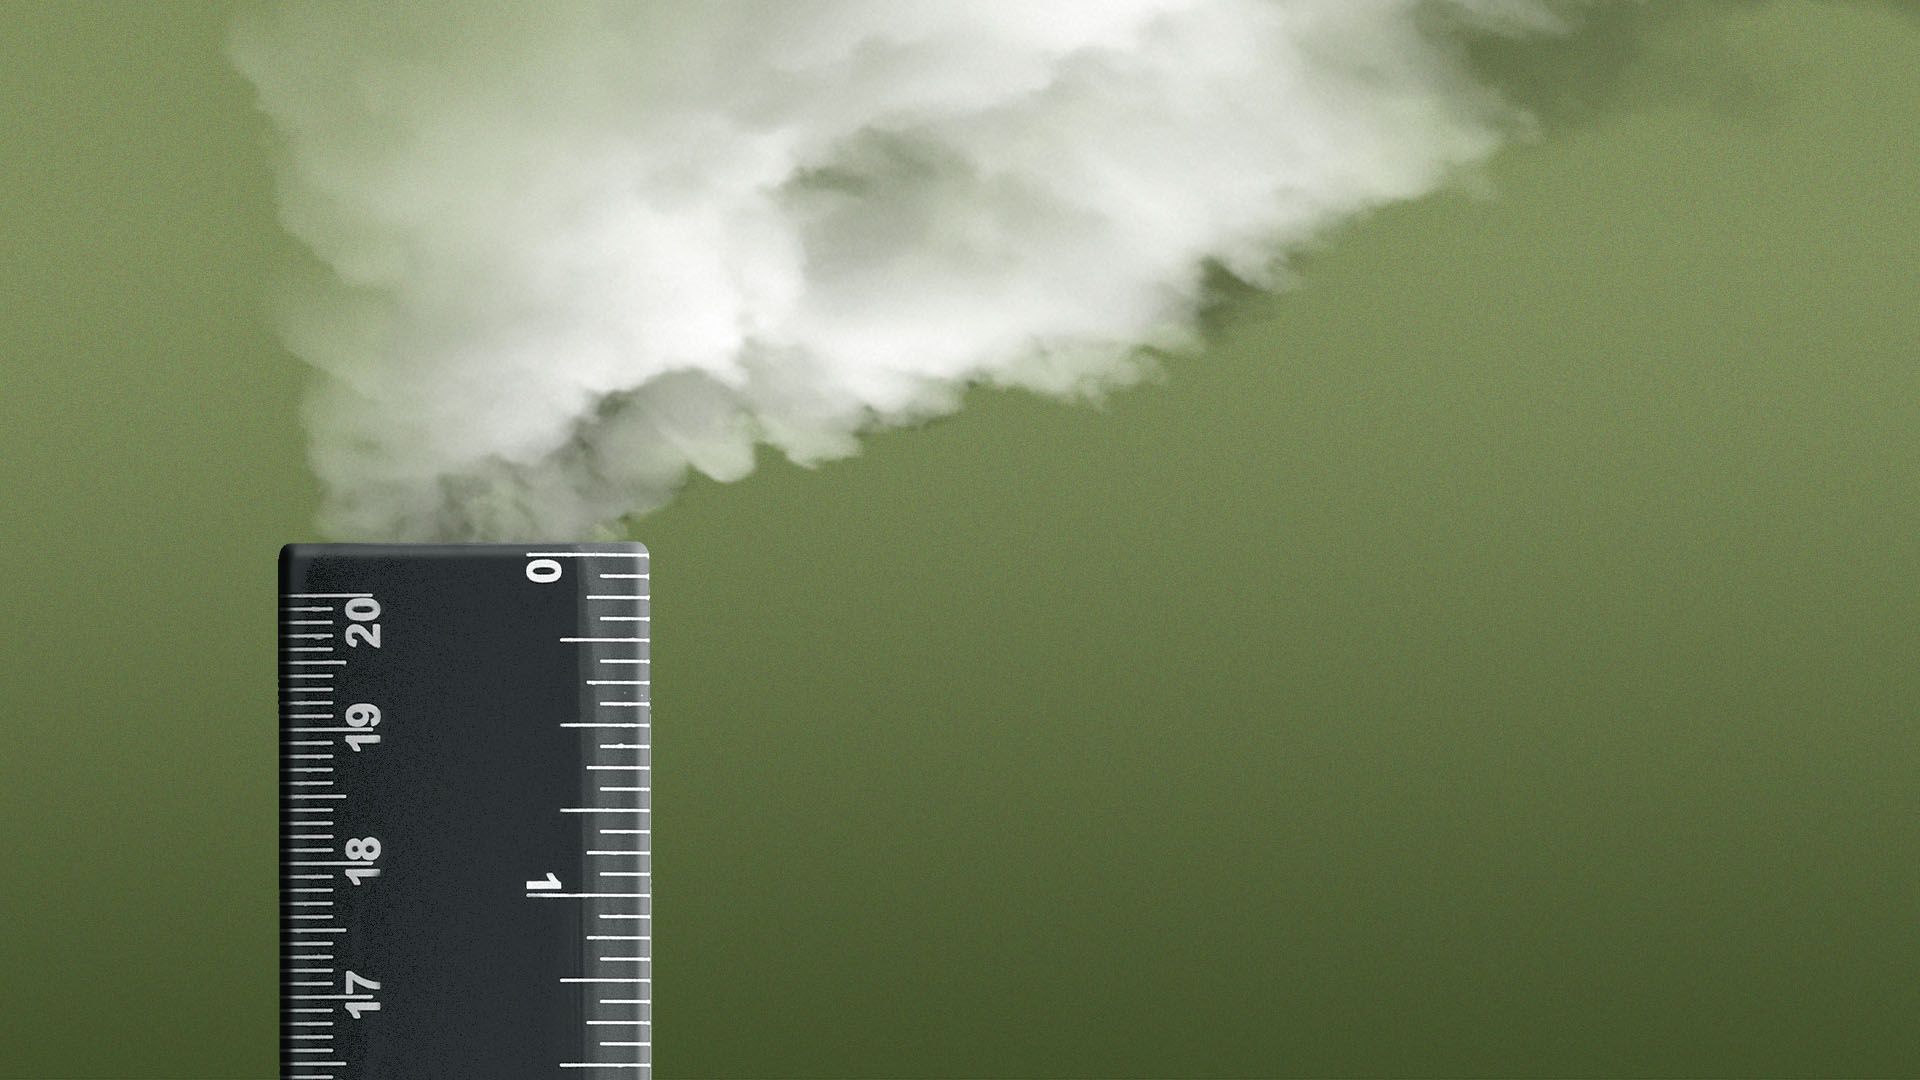 Illustration of a ruler with smoke coming out of the top, like a smokestack.